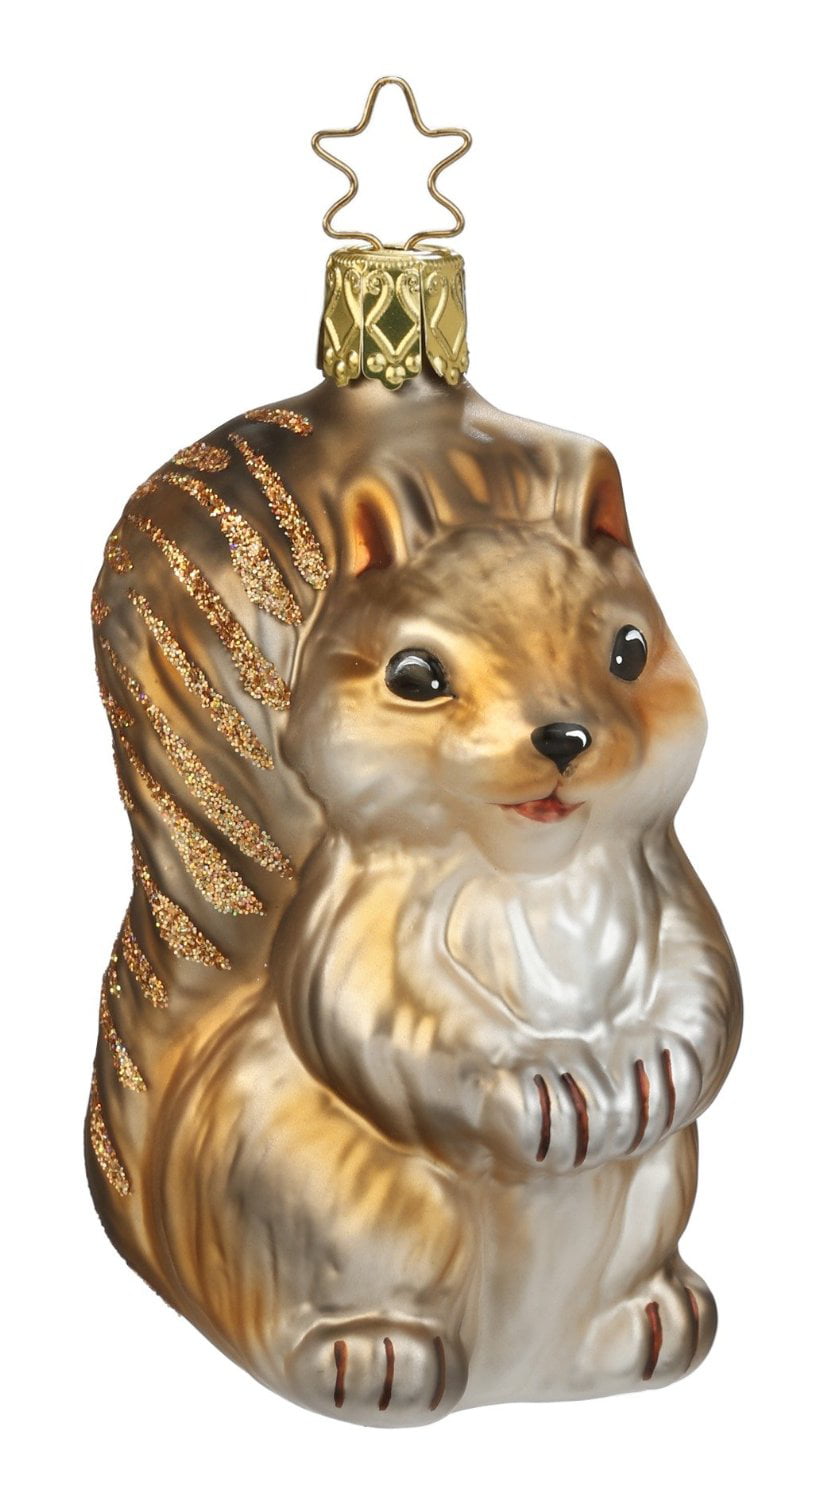 Squirrel mouth blown glass ornament Christmas tree ornament 